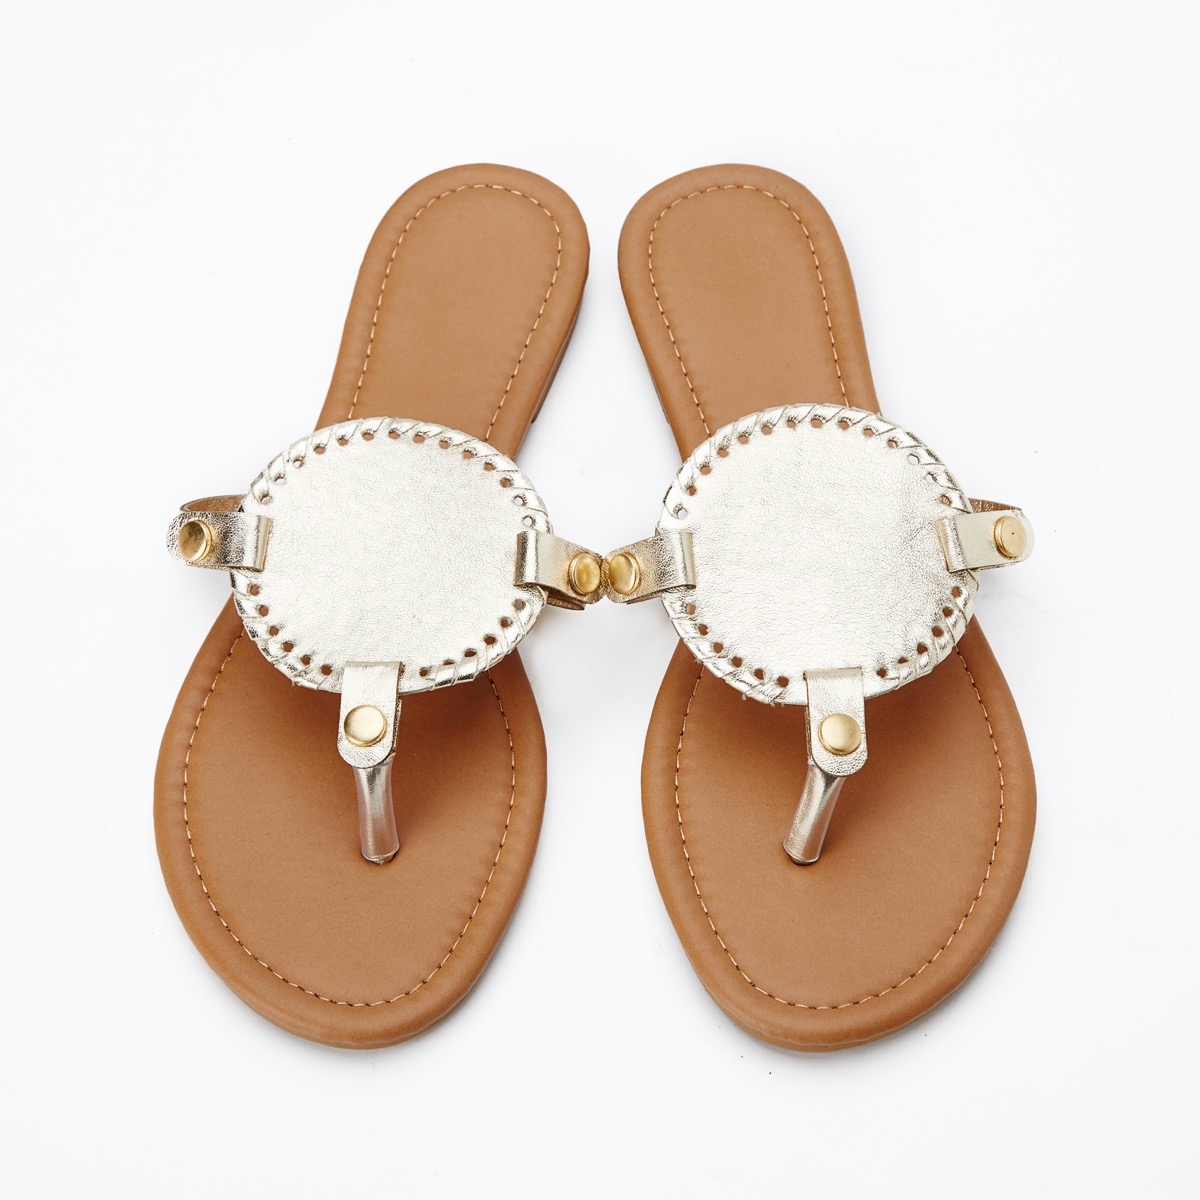 EasyStitch Medallion Sandals - CHAMPAGNE GOLD - CLOSEOUT